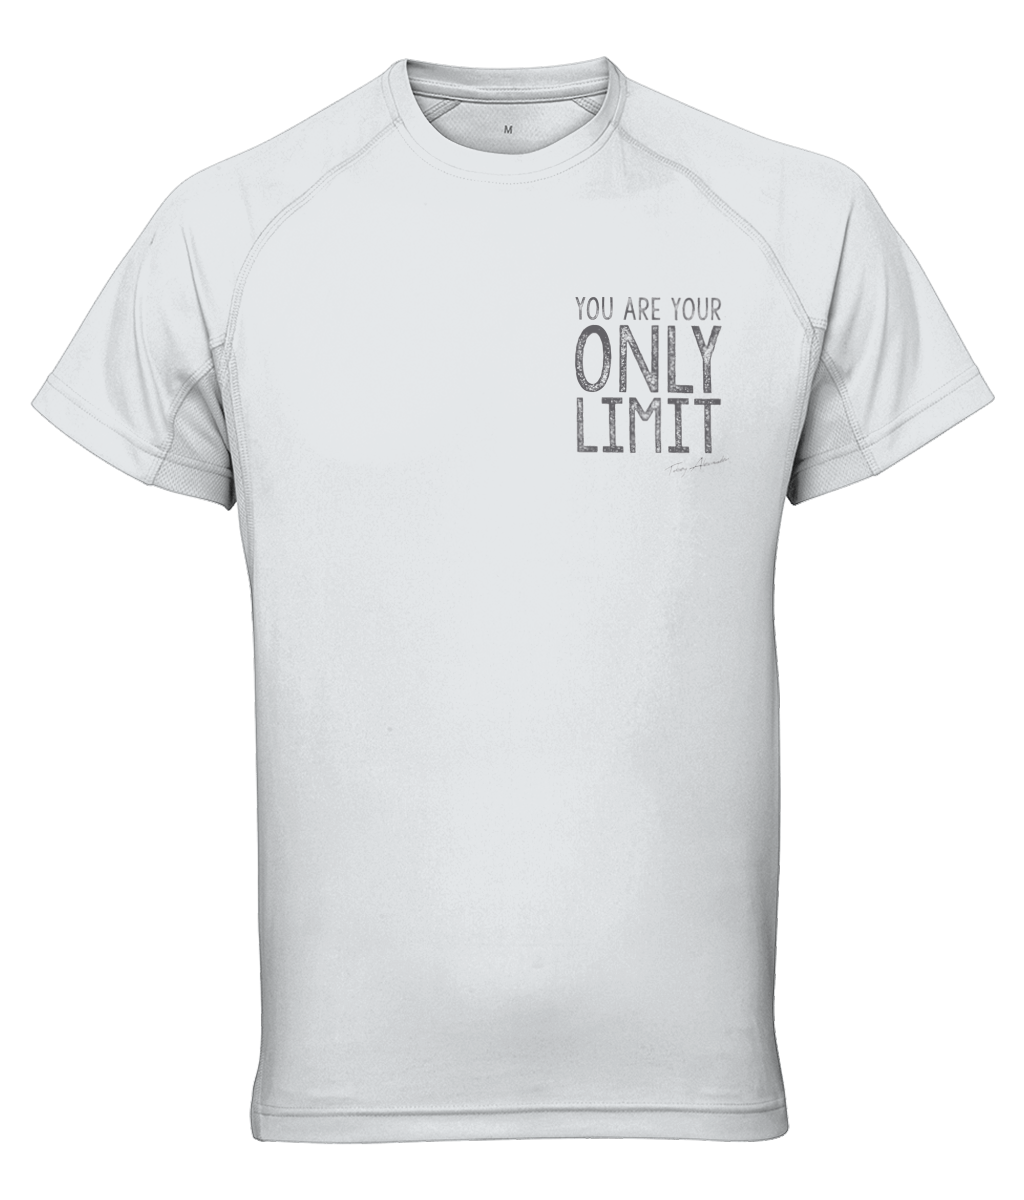 Unleash Your Limitless Potential - TriDri® Performance T-shirt Clothes by Tobey Alexander